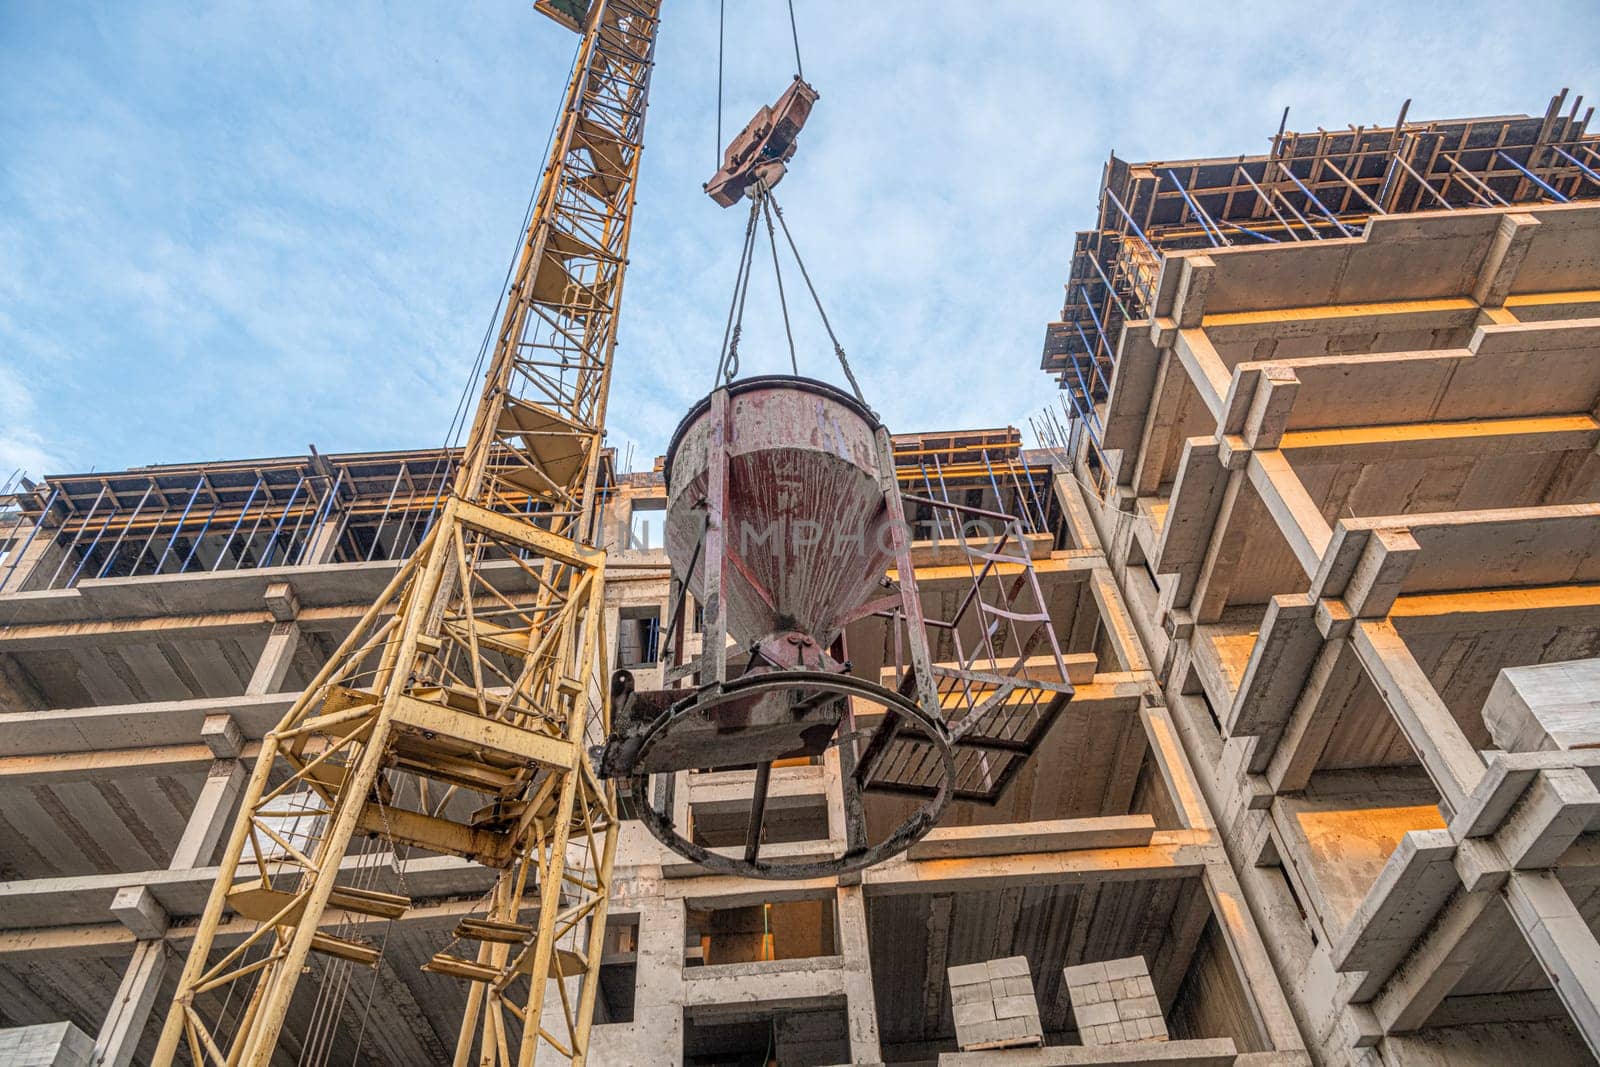 A low angle shot of a crane with equipment on a construction site with a new building infrastructure. Pouring concrete into a mold